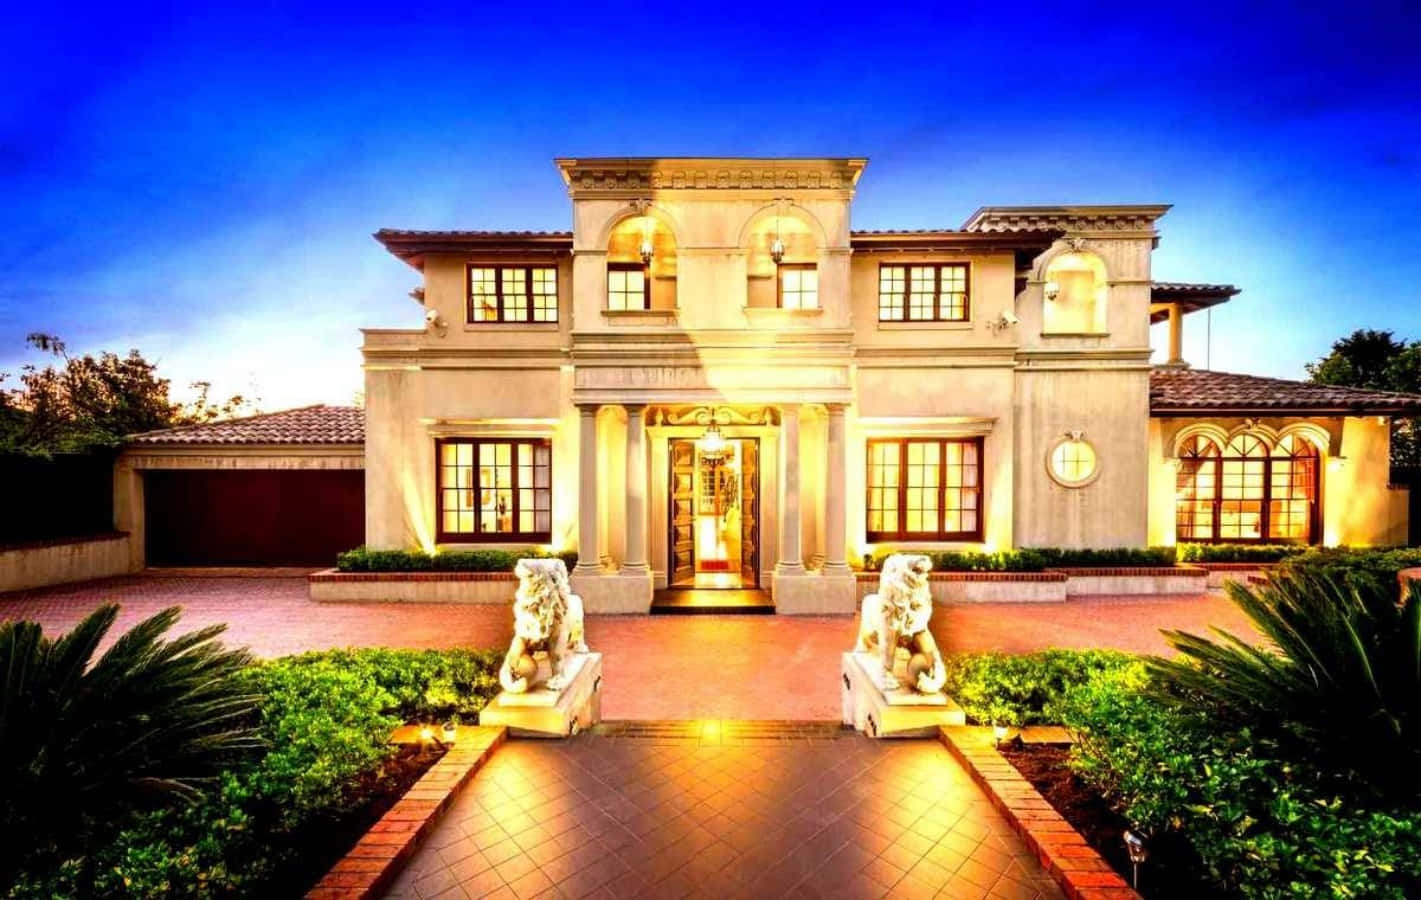 A Large Mansion With A Large Driveway